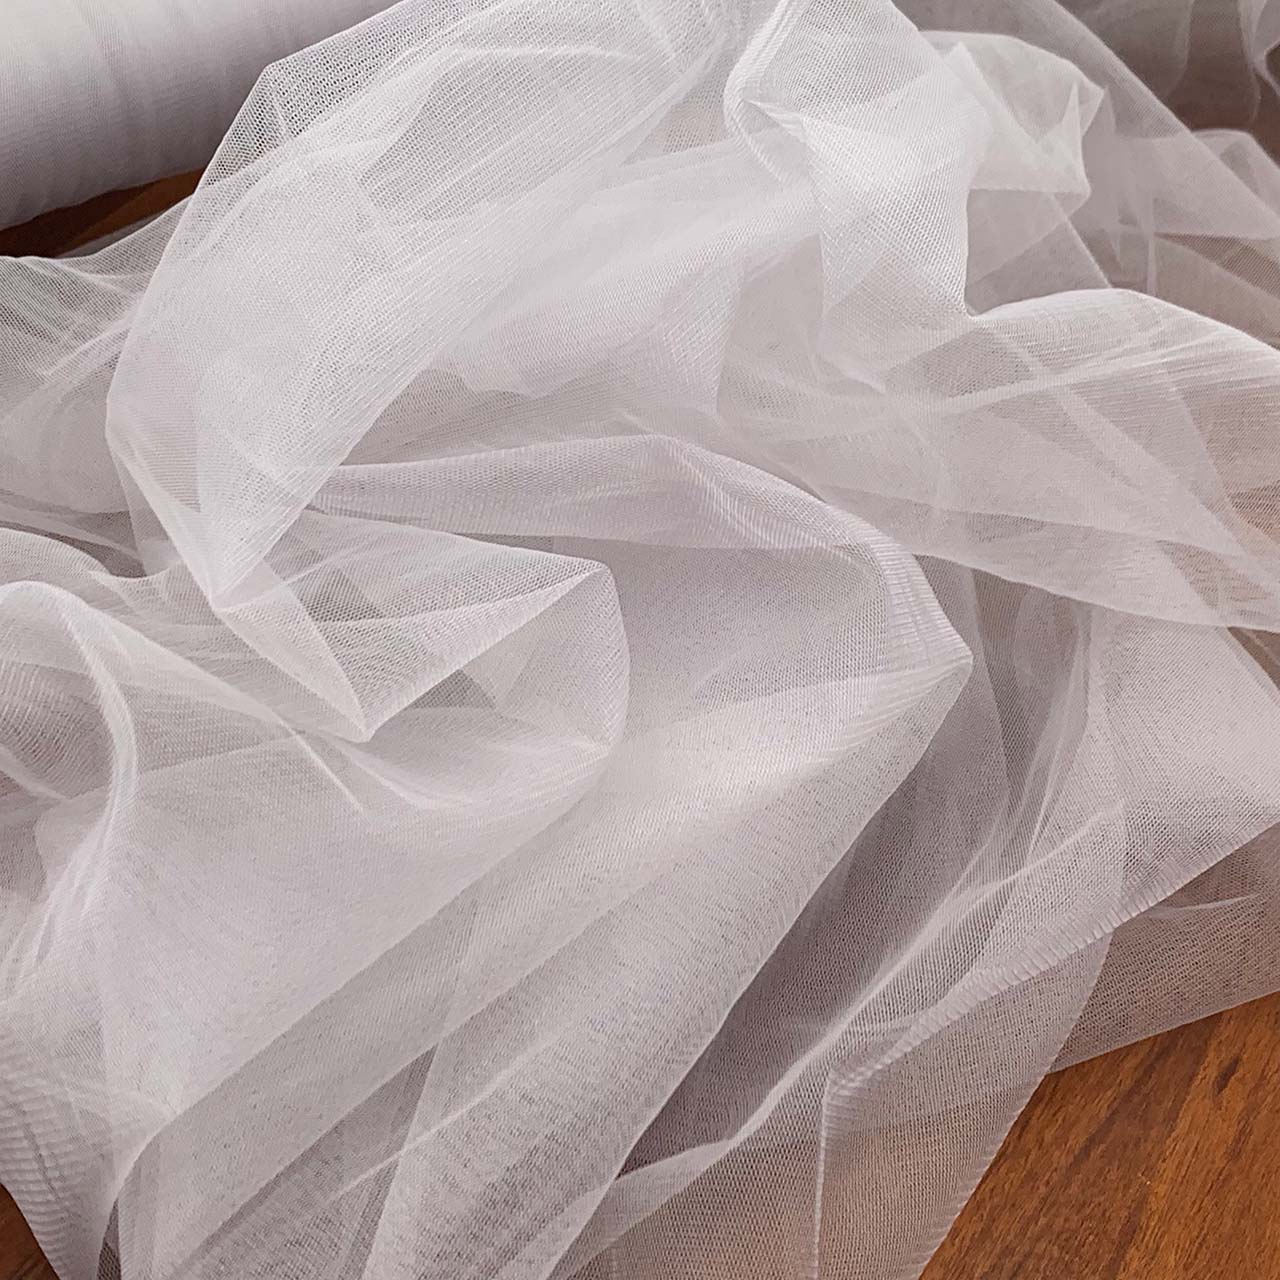 Embroidered Tulle Lace Fabric: Bridal Exclusive Fabrics from Italy